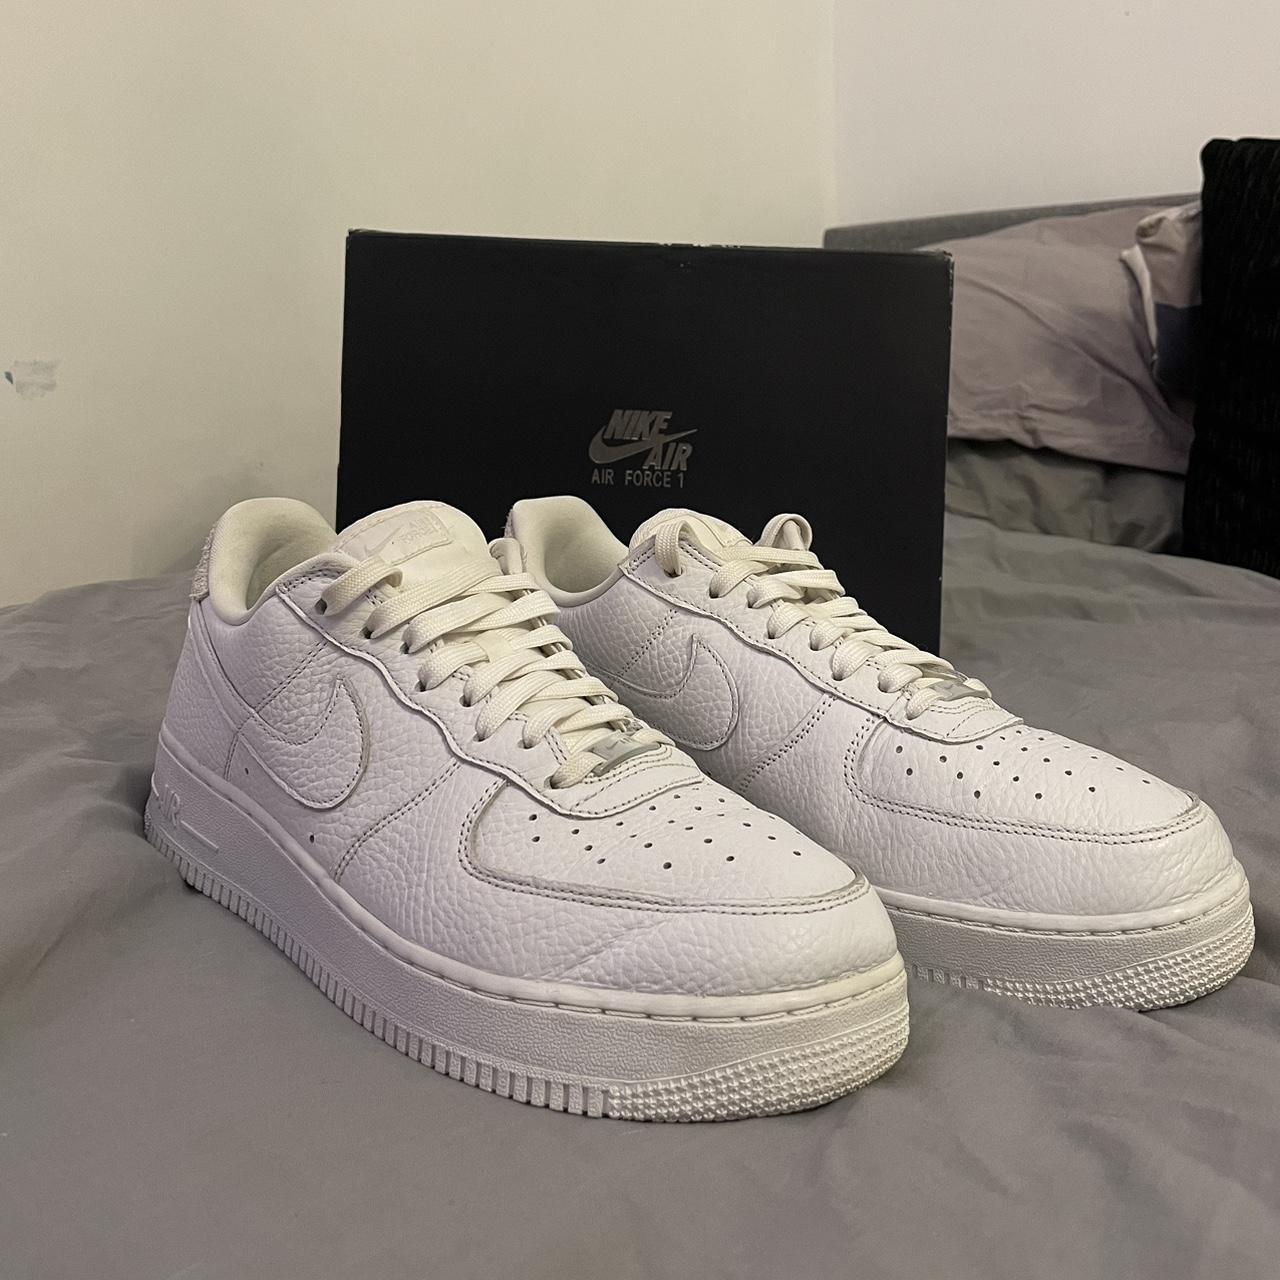 Nike Air Force 1 Craft UK10 White. They’re true to... - Depop